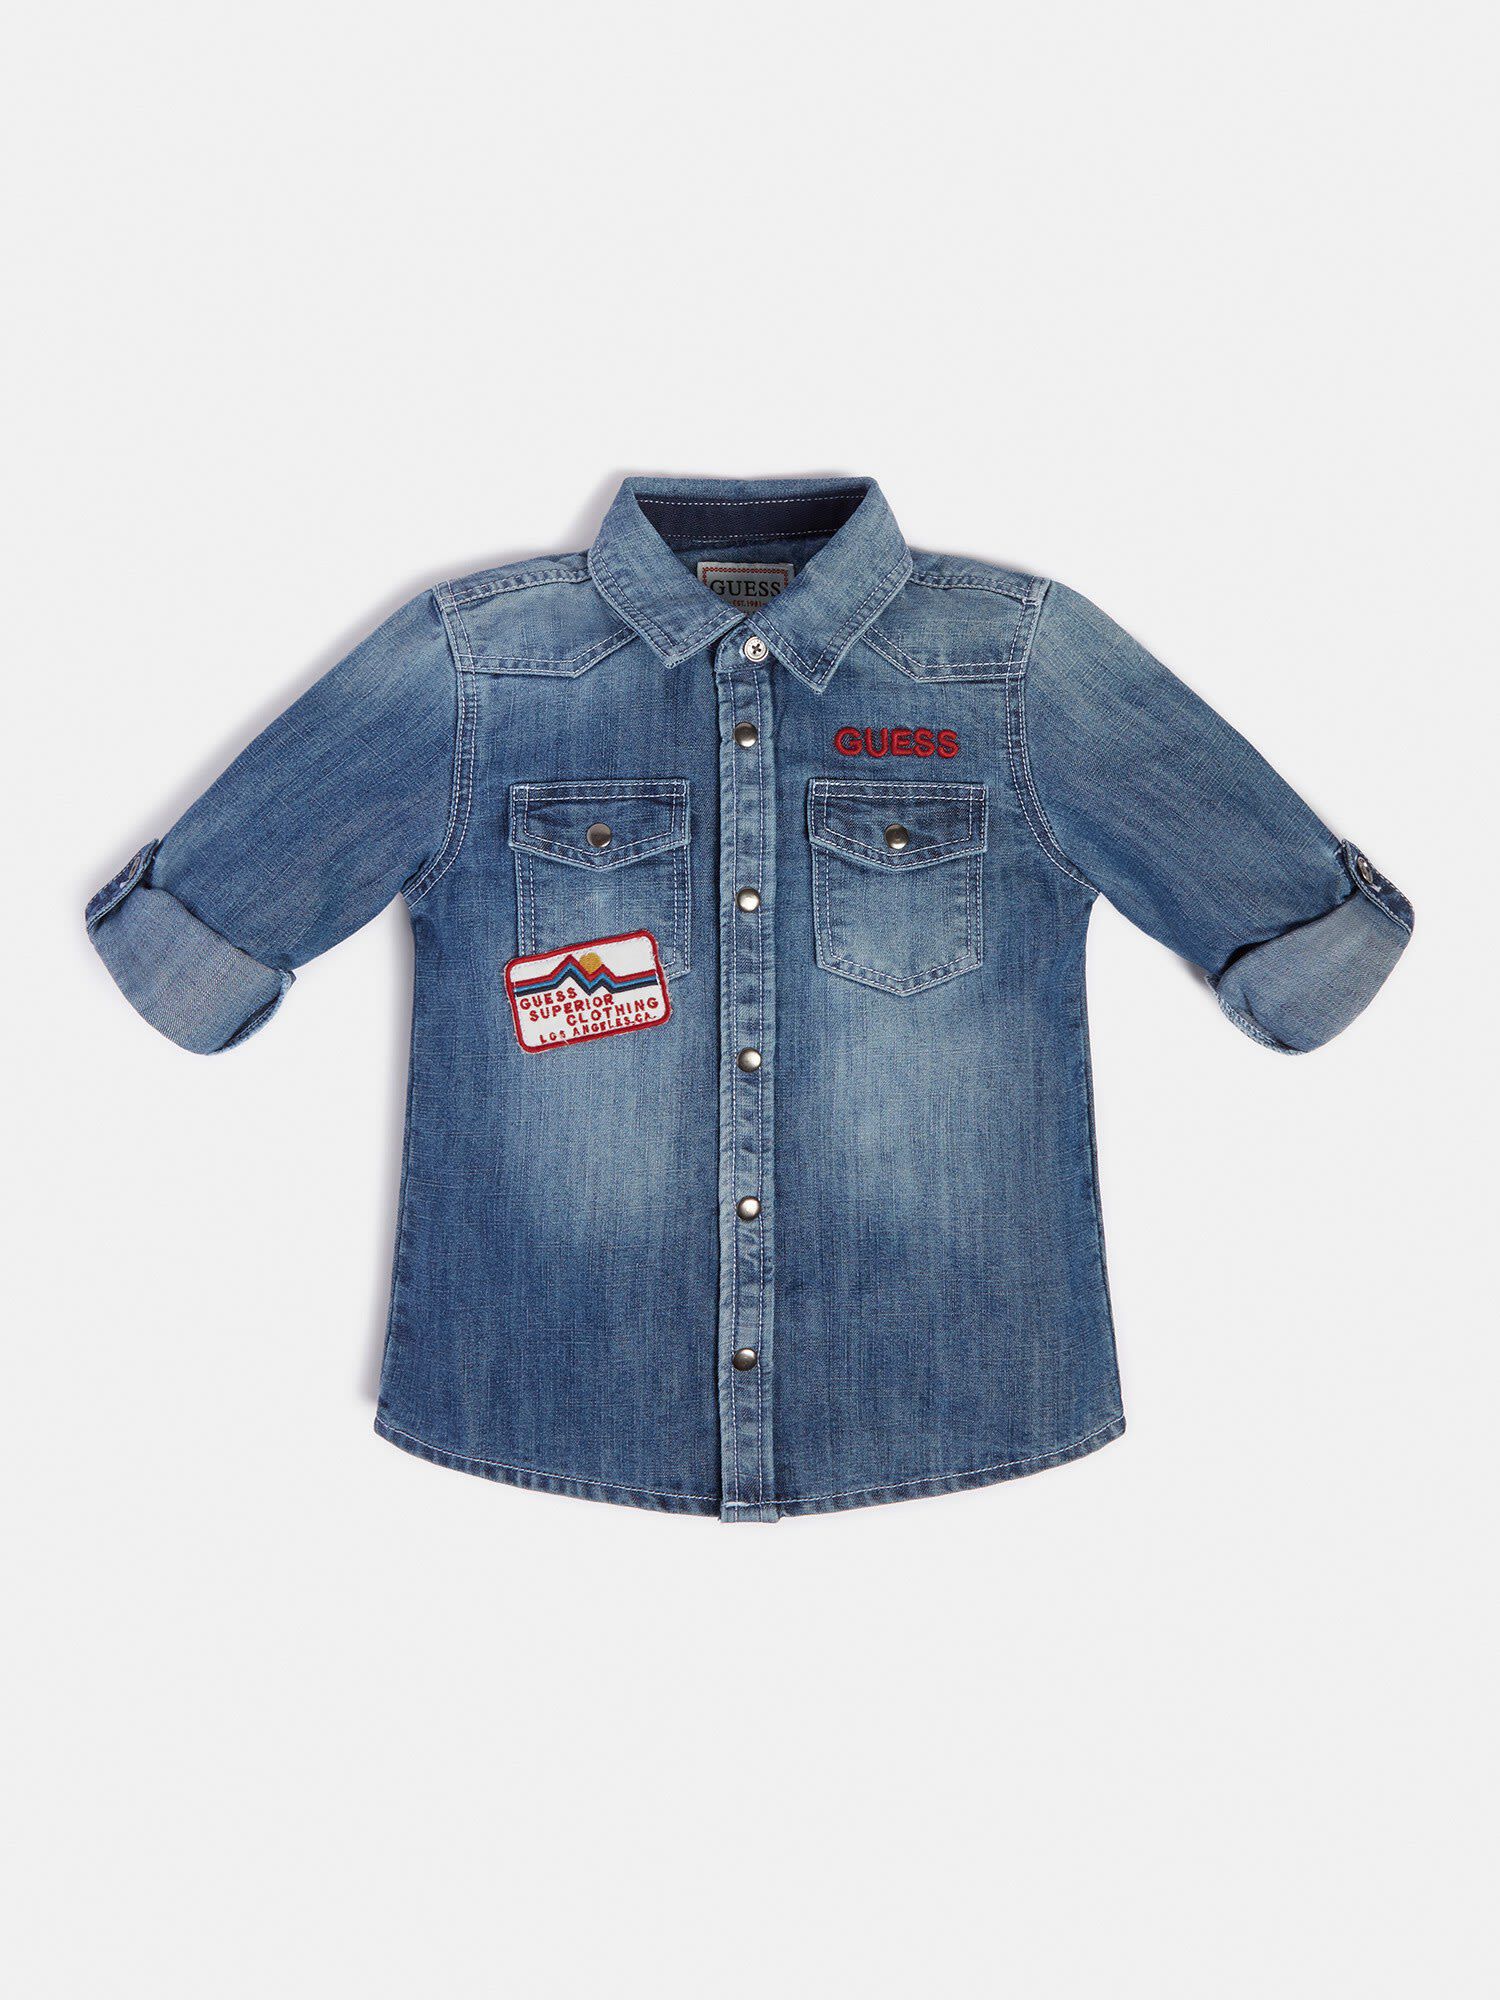 Girls' denim shirts size 86, compare prices and buy online